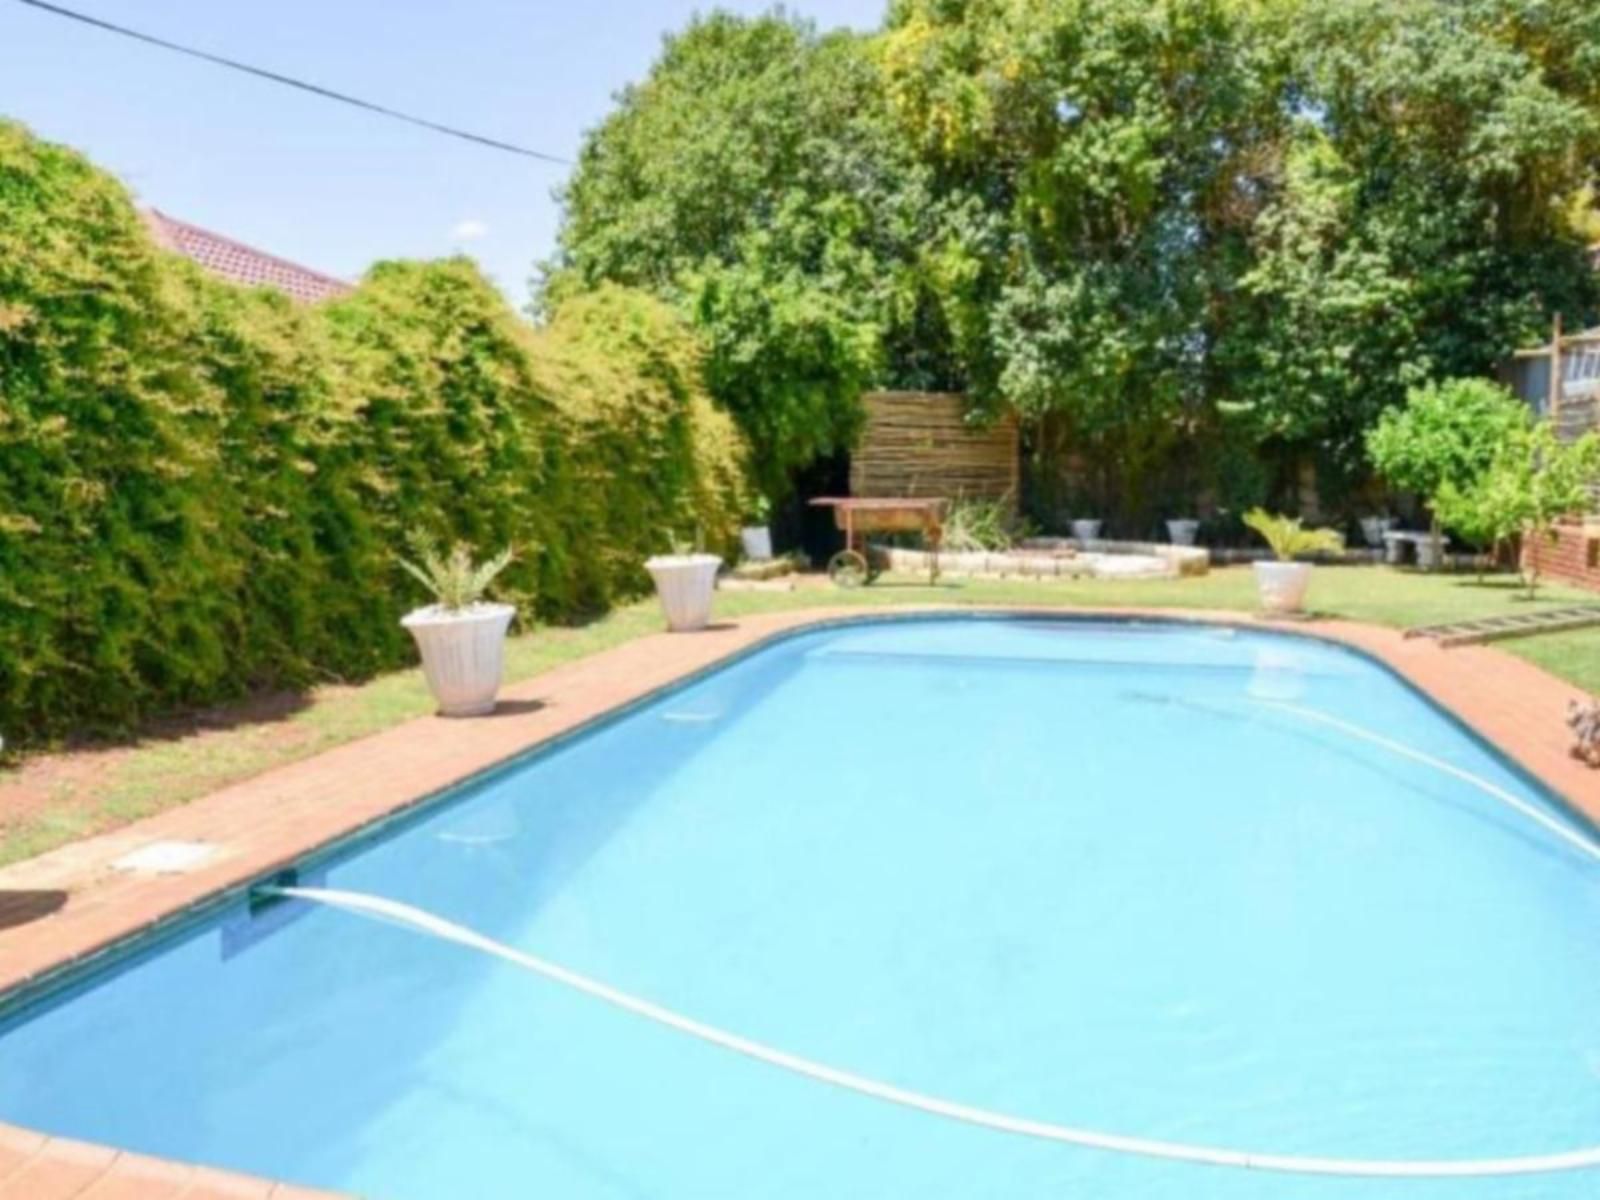 Potch Best Rest Potchefstroom North West Province South Africa Complementary Colors, Colorful, Garden, Nature, Plant, Swimming Pool